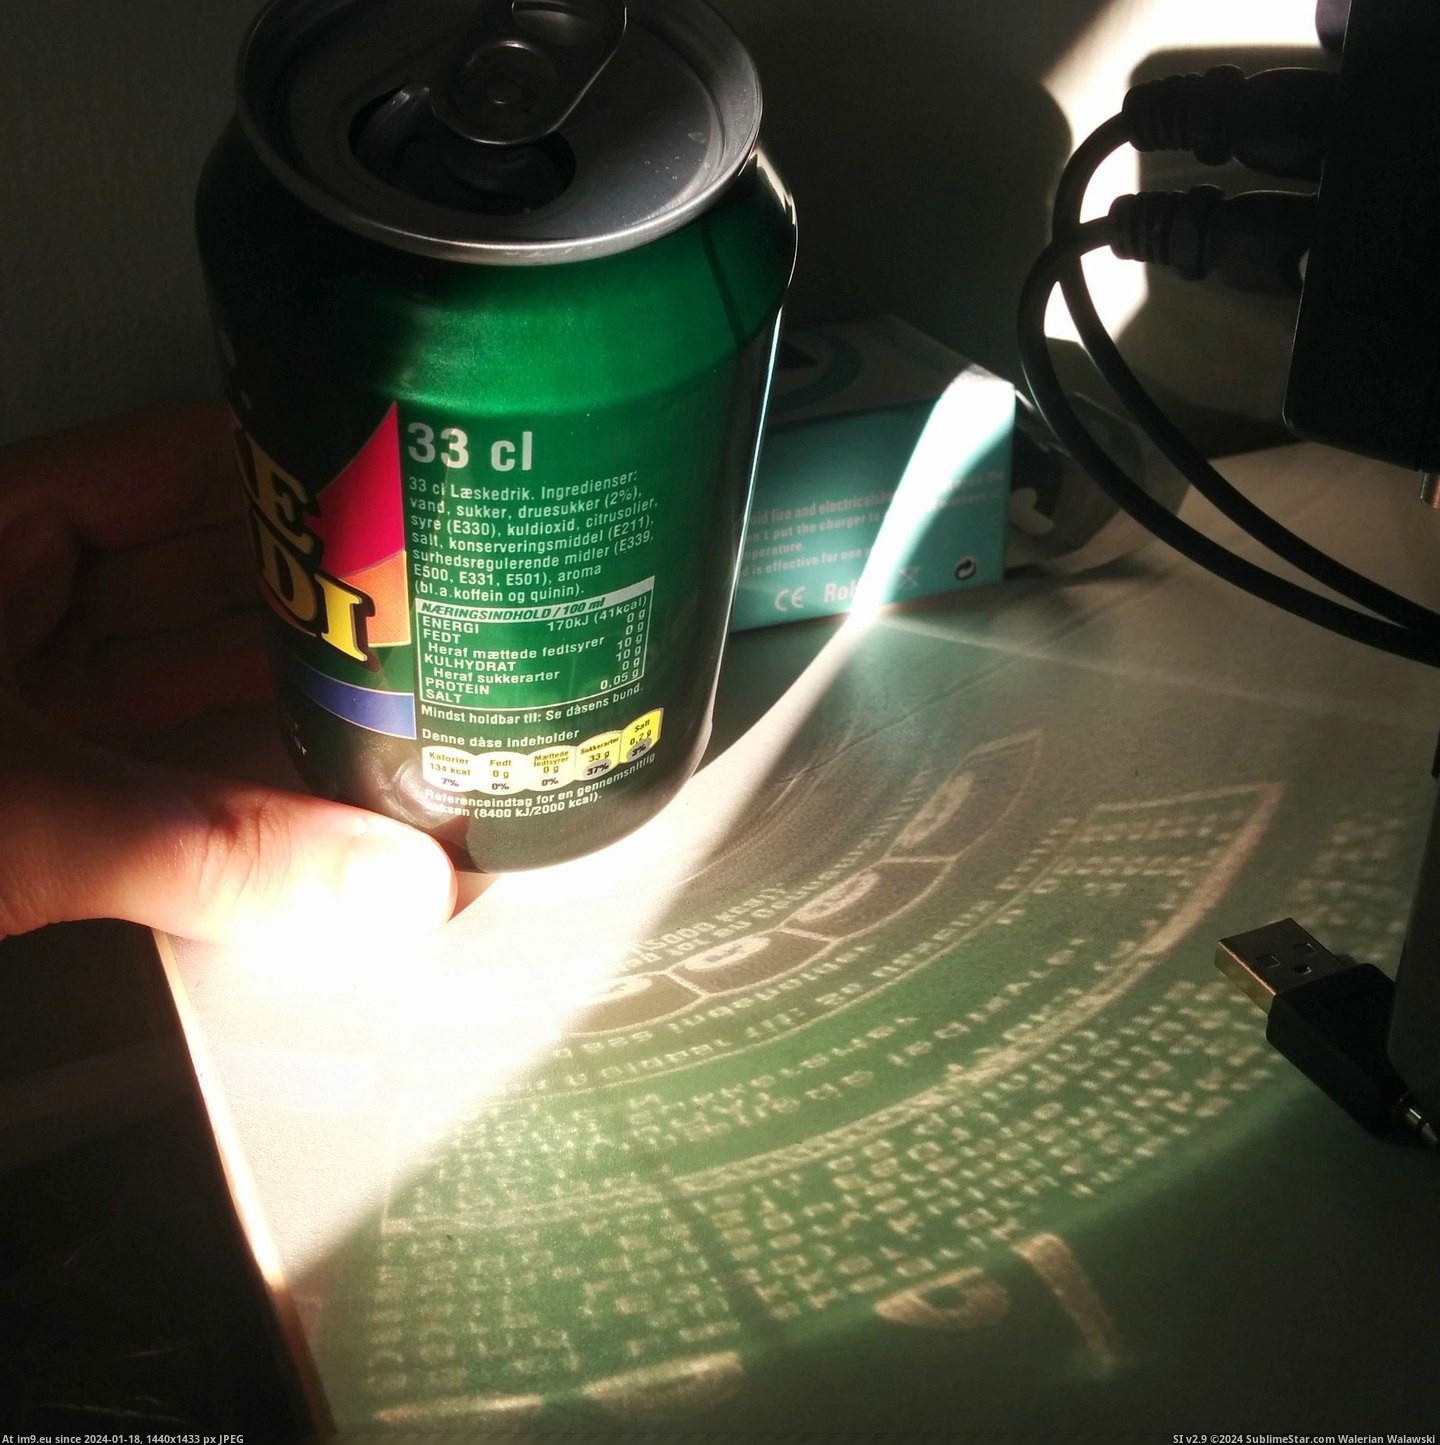 [Mildlyinteresting] The sunlight projected the can's writing (in My r/MILDLYINTERESTING favs)